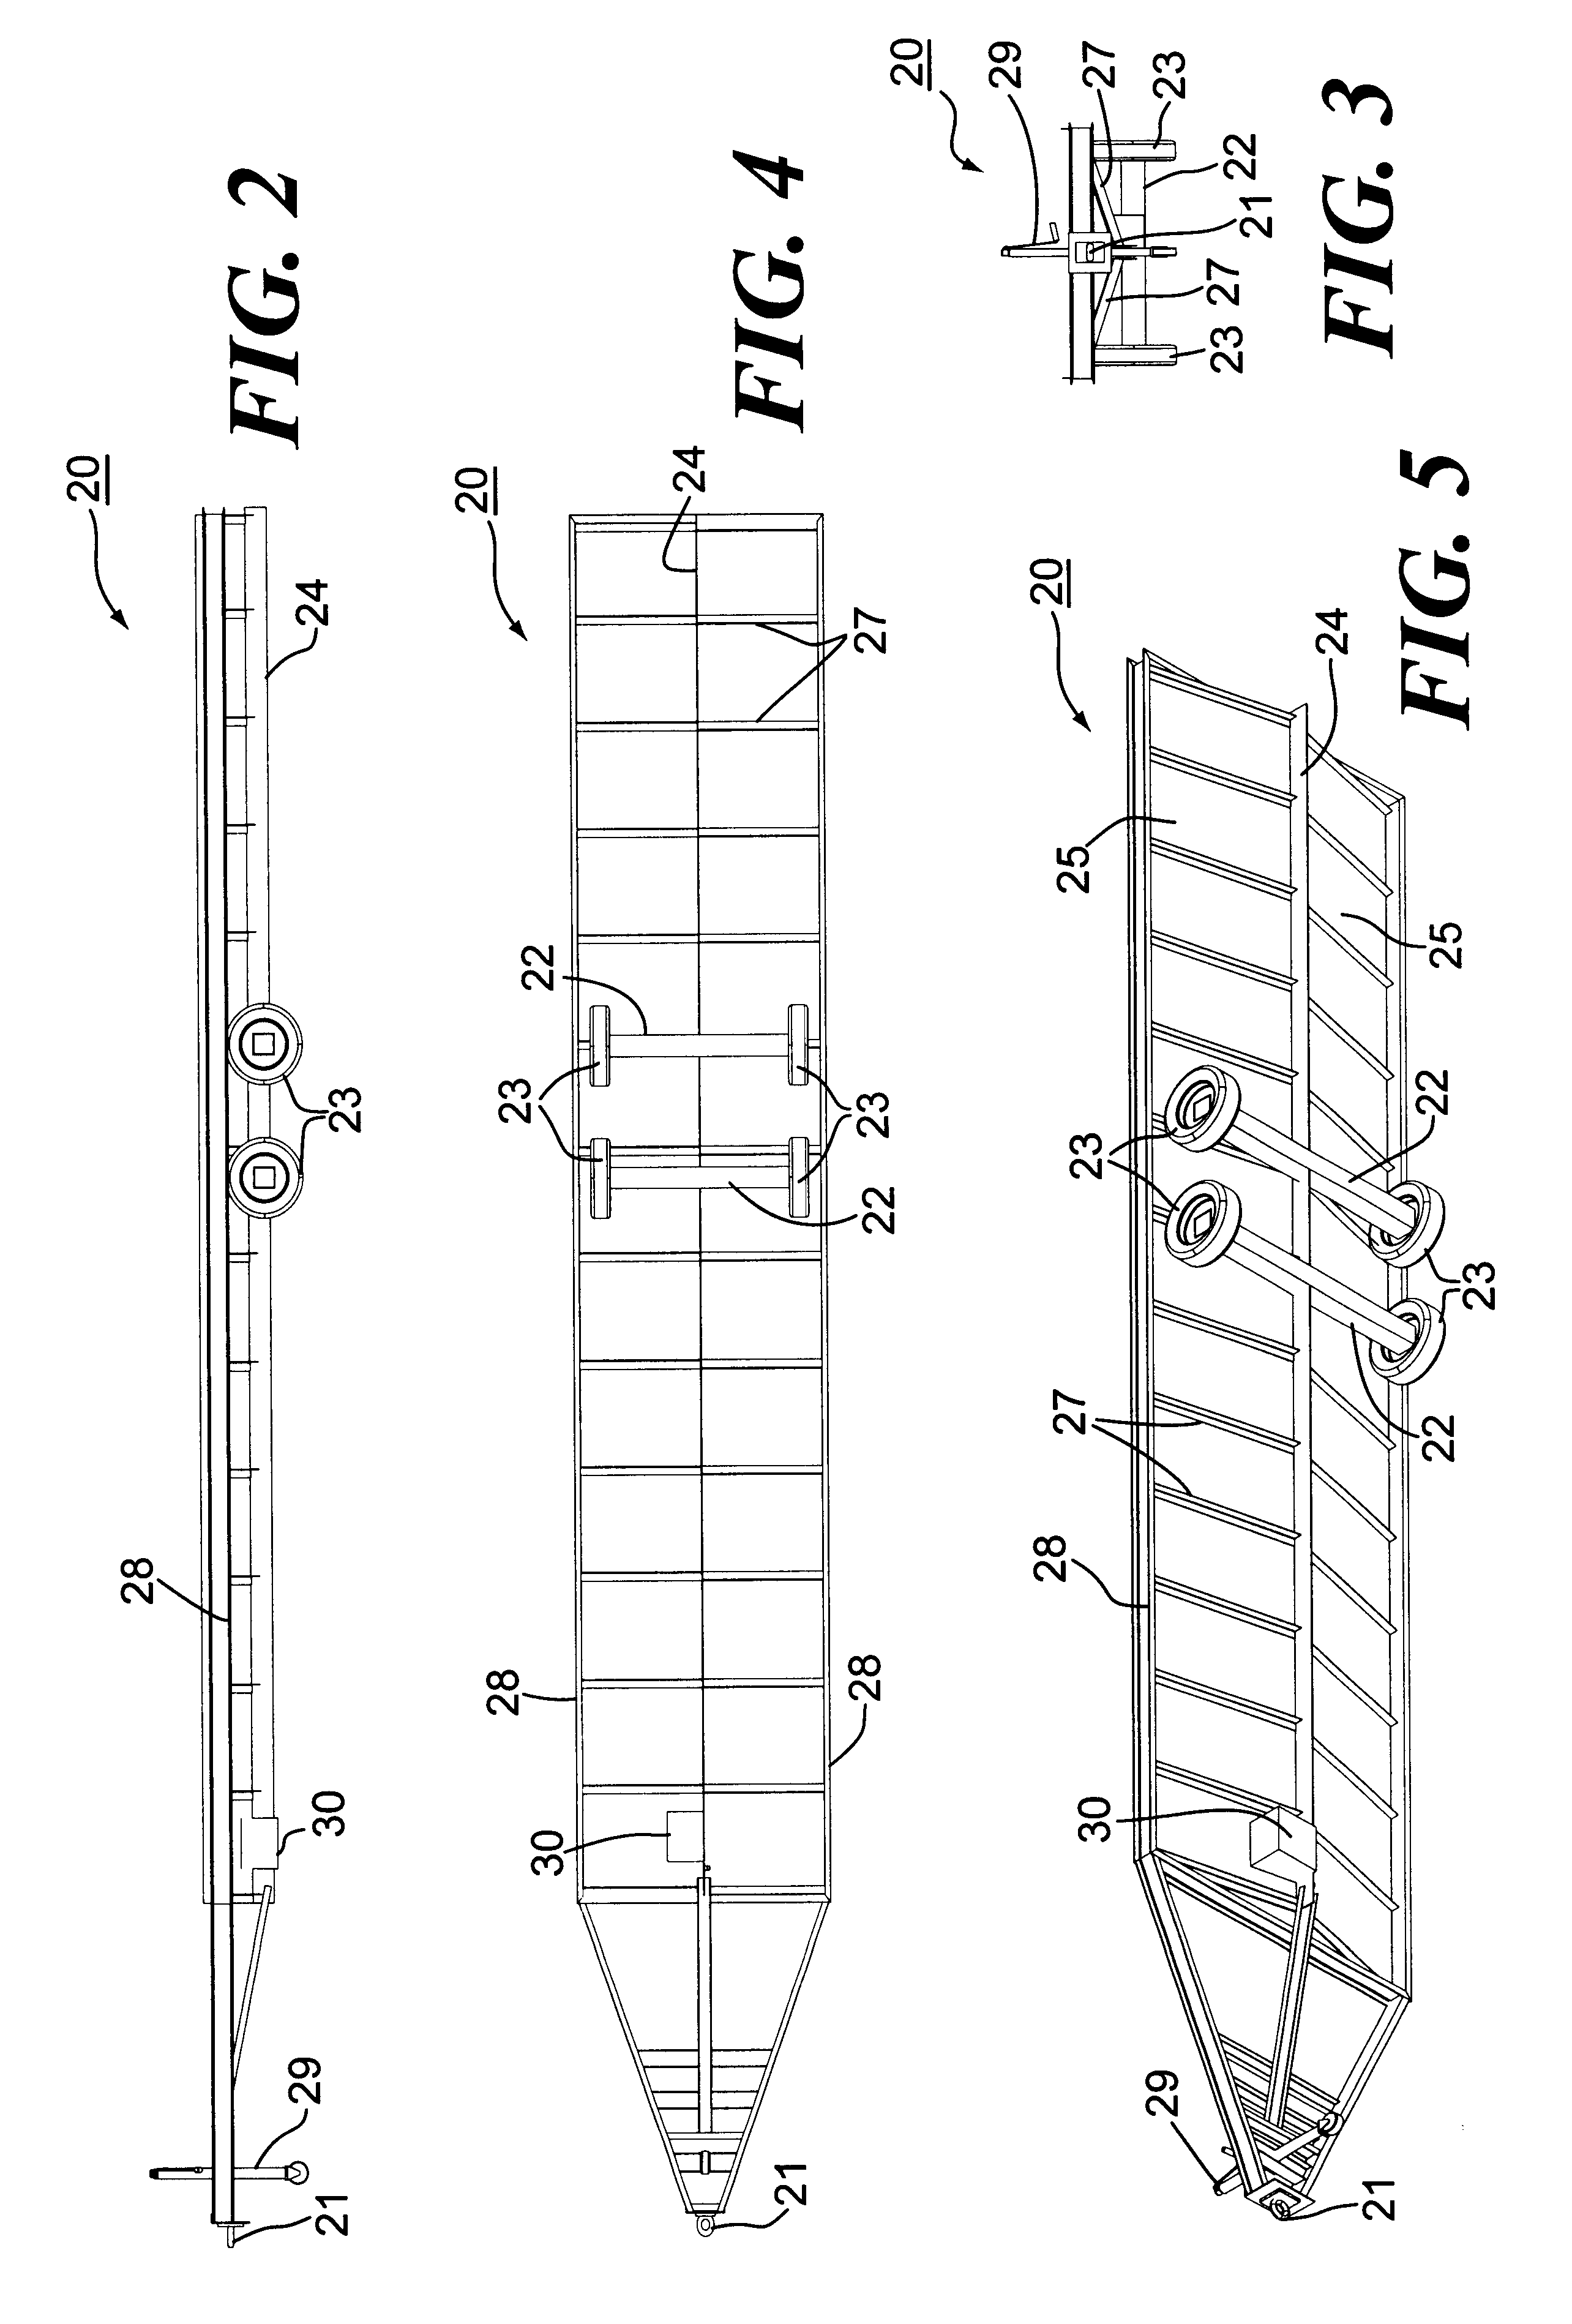 Systems and methods for dispensing, collecting and processing wash fluid